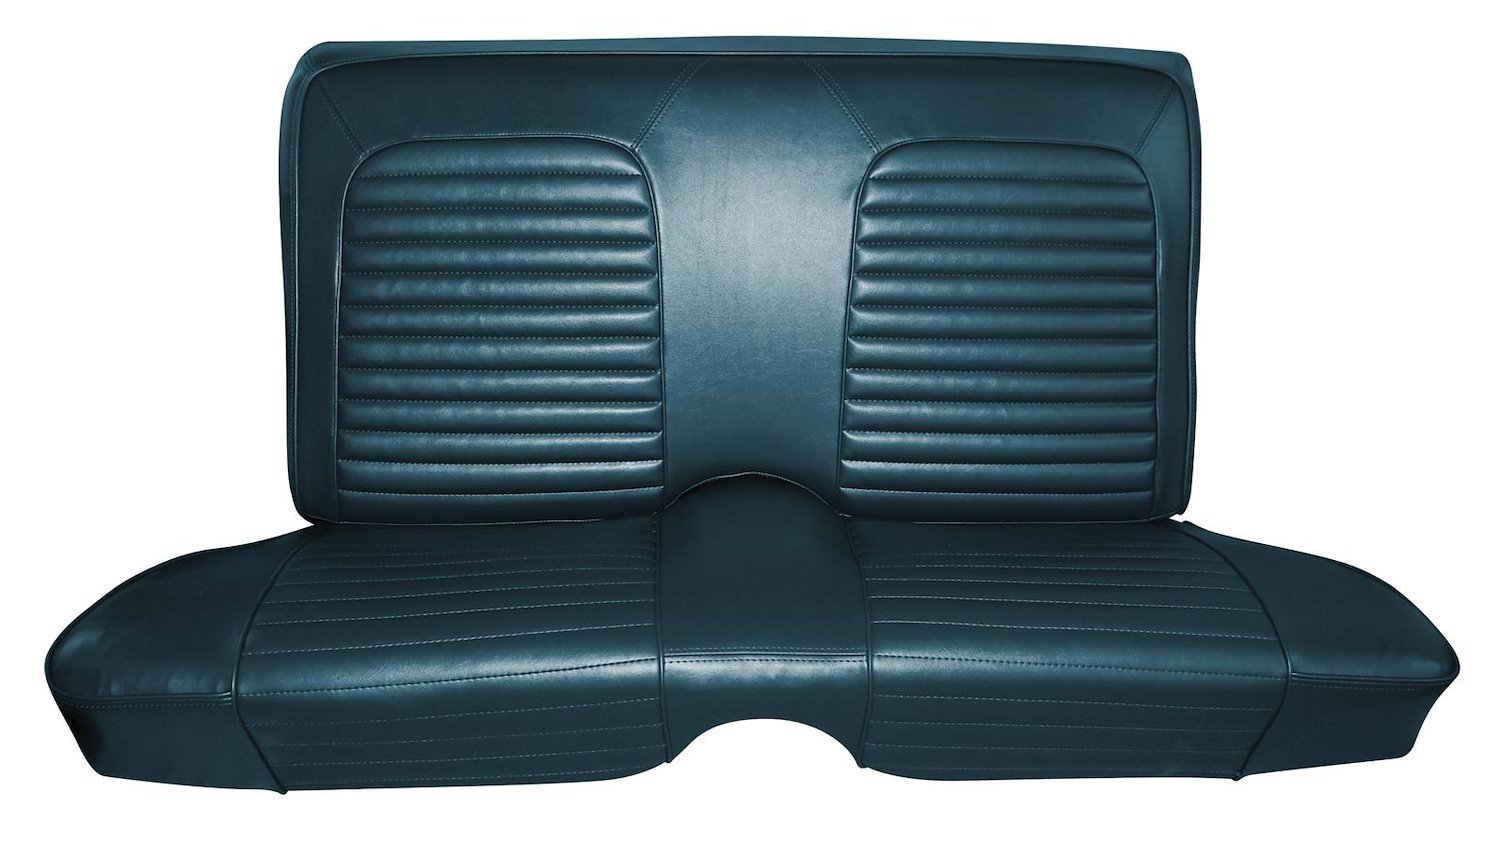 1967 Chevrolet Camaro Deluxe Interior Optional Rear Fold-Down Bench Seat Upholstery Set